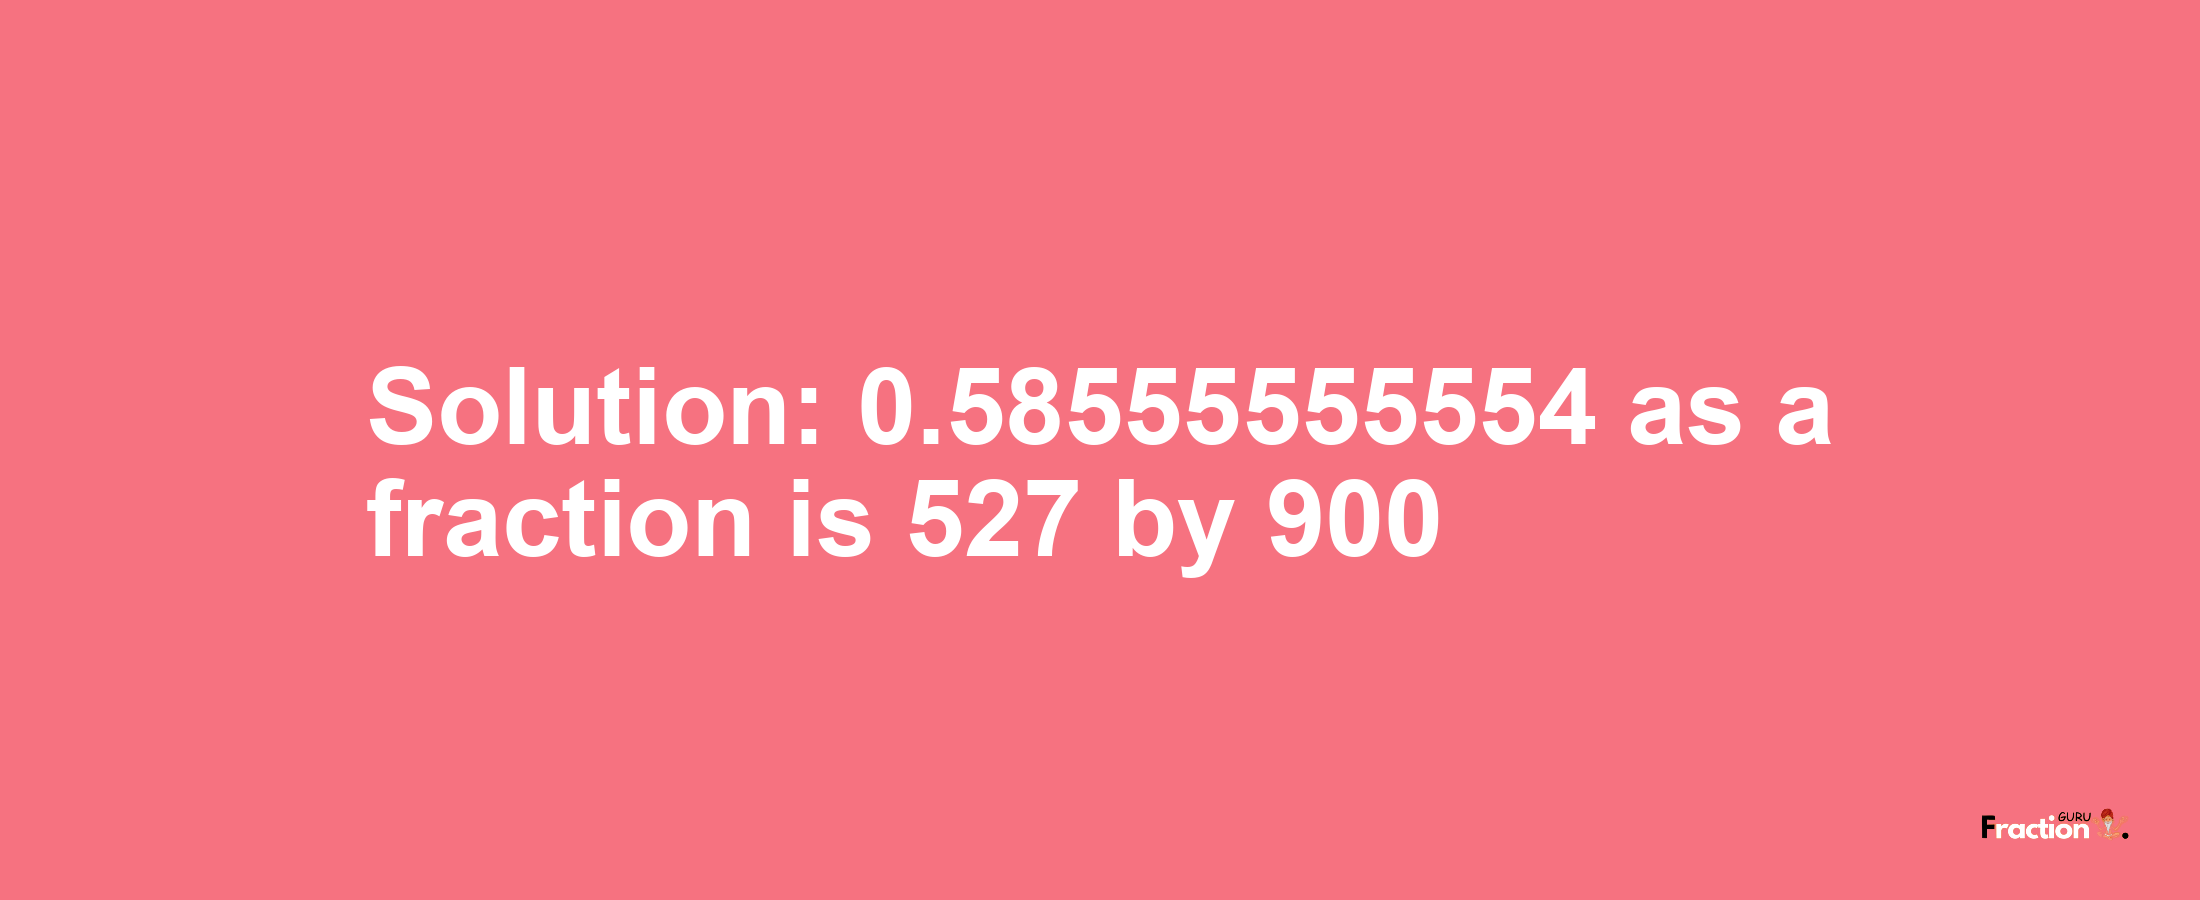 Solution:0.58555555554 as a fraction is 527/900